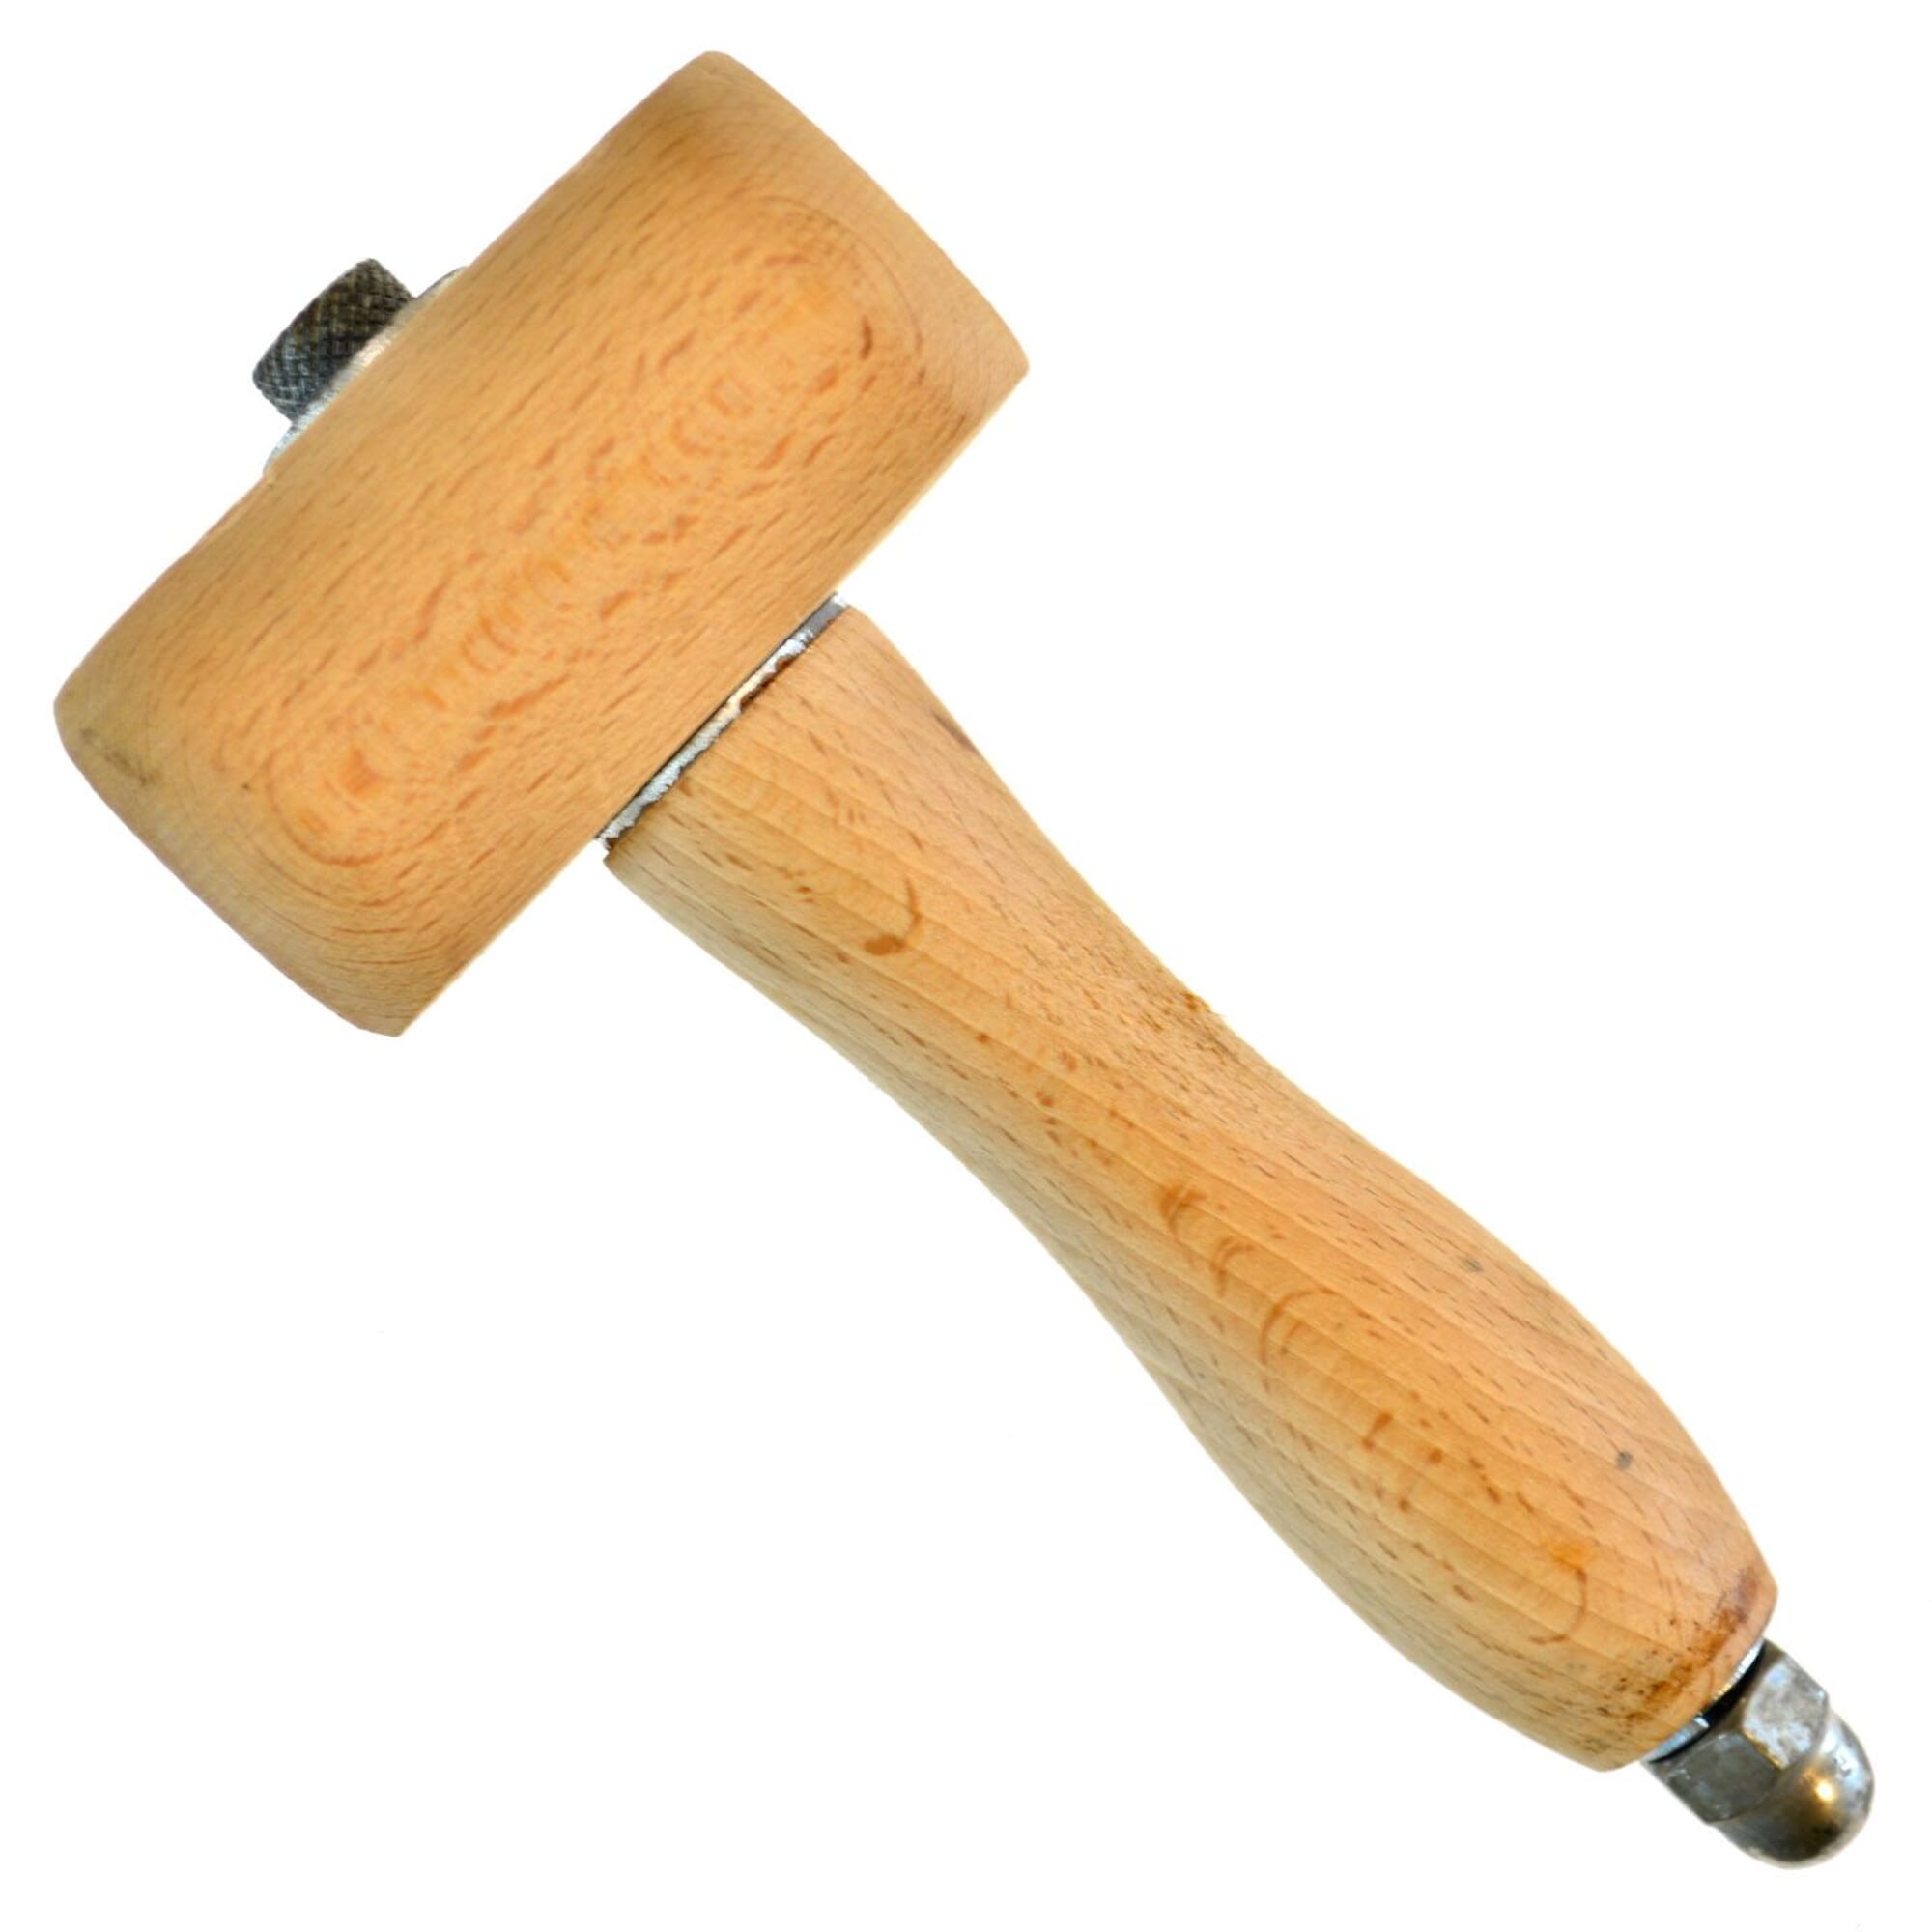 Wood Mallet Hammer Leather craft Punch Hammer Leather Craft Carving  Woodworking Tool